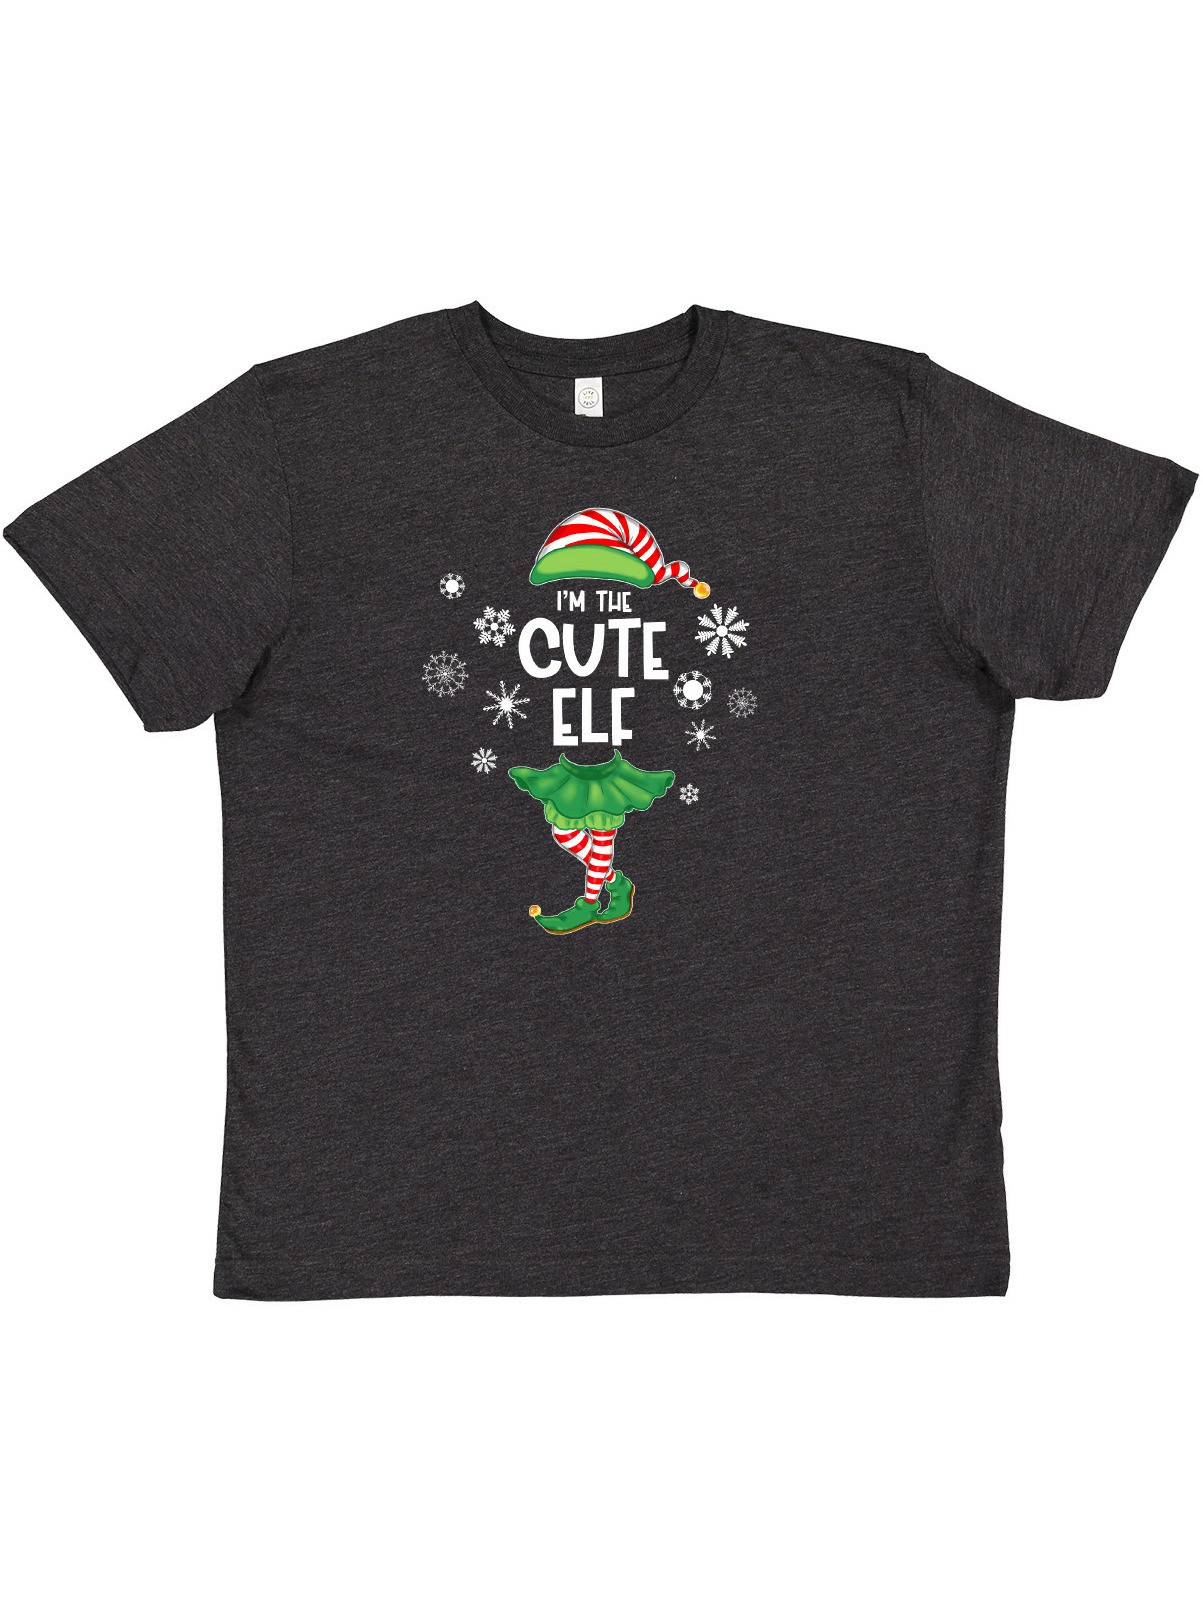 Inktastic Funny Christmas I'm the Cute Elf with Shoes and Hat Youth T-Shirt - image 1 of 4